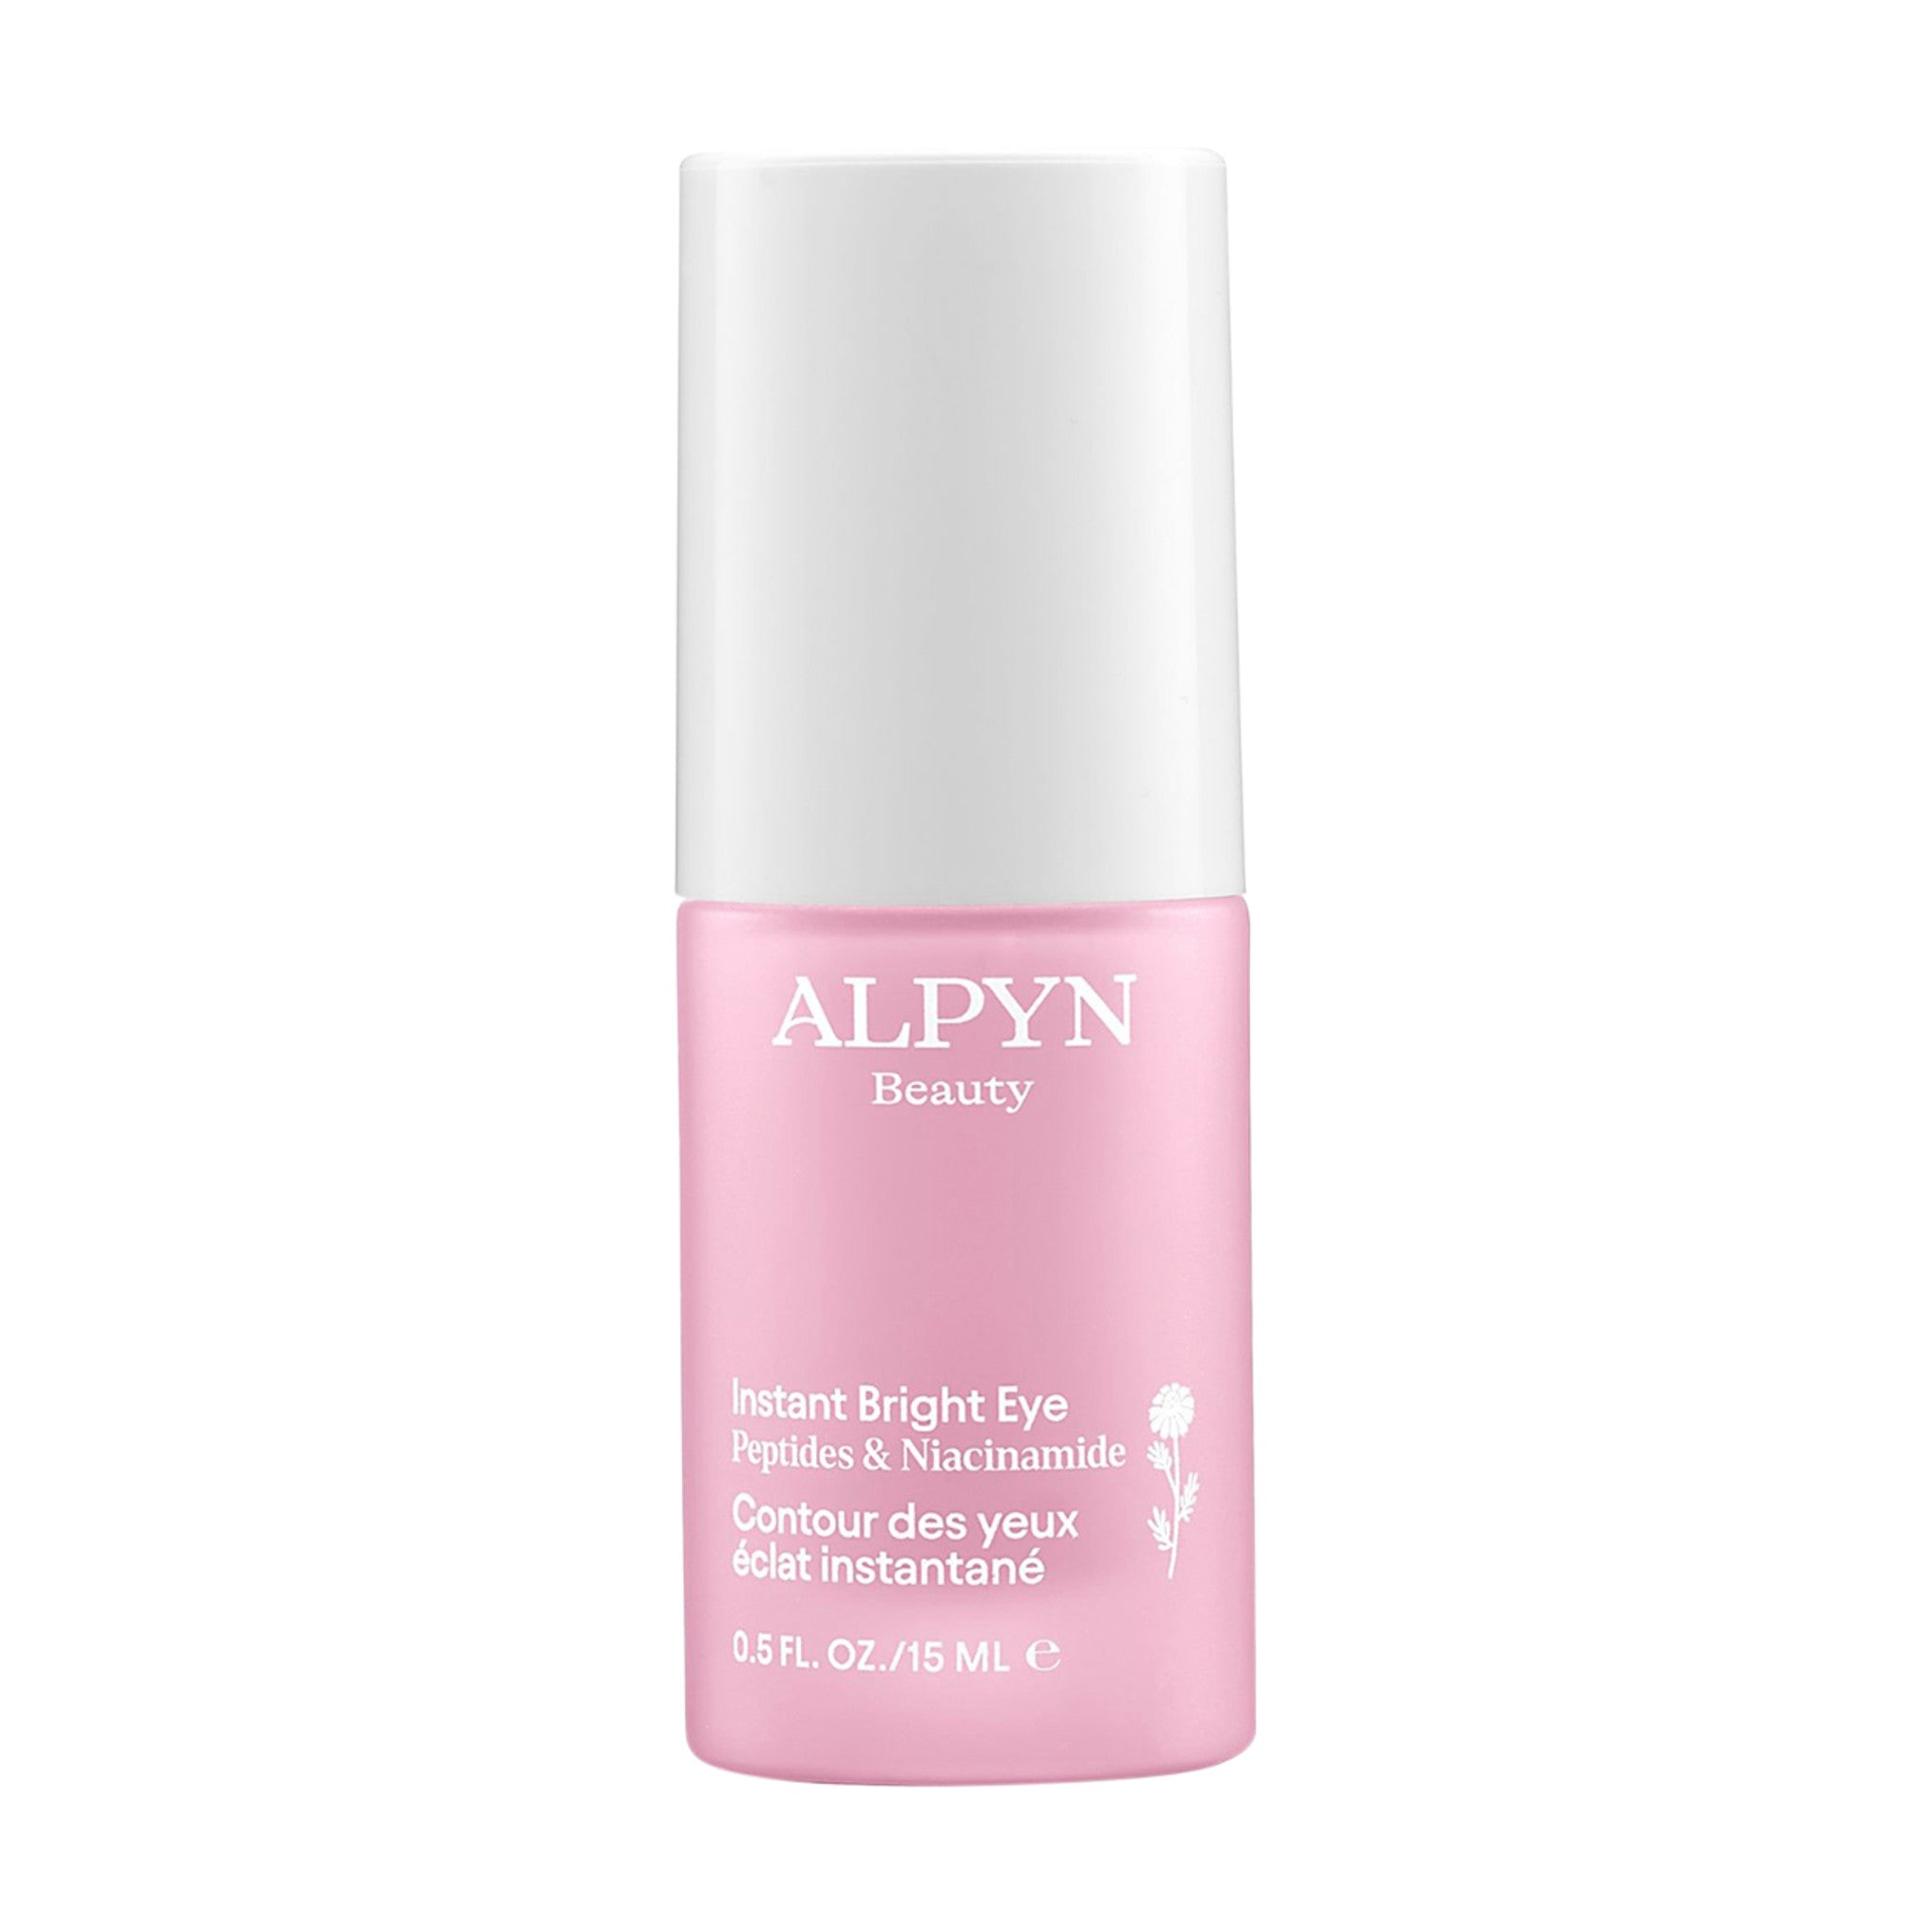 Alpyn Beauty Instant Bright Eye with Peptides and Niacinamide  main image.